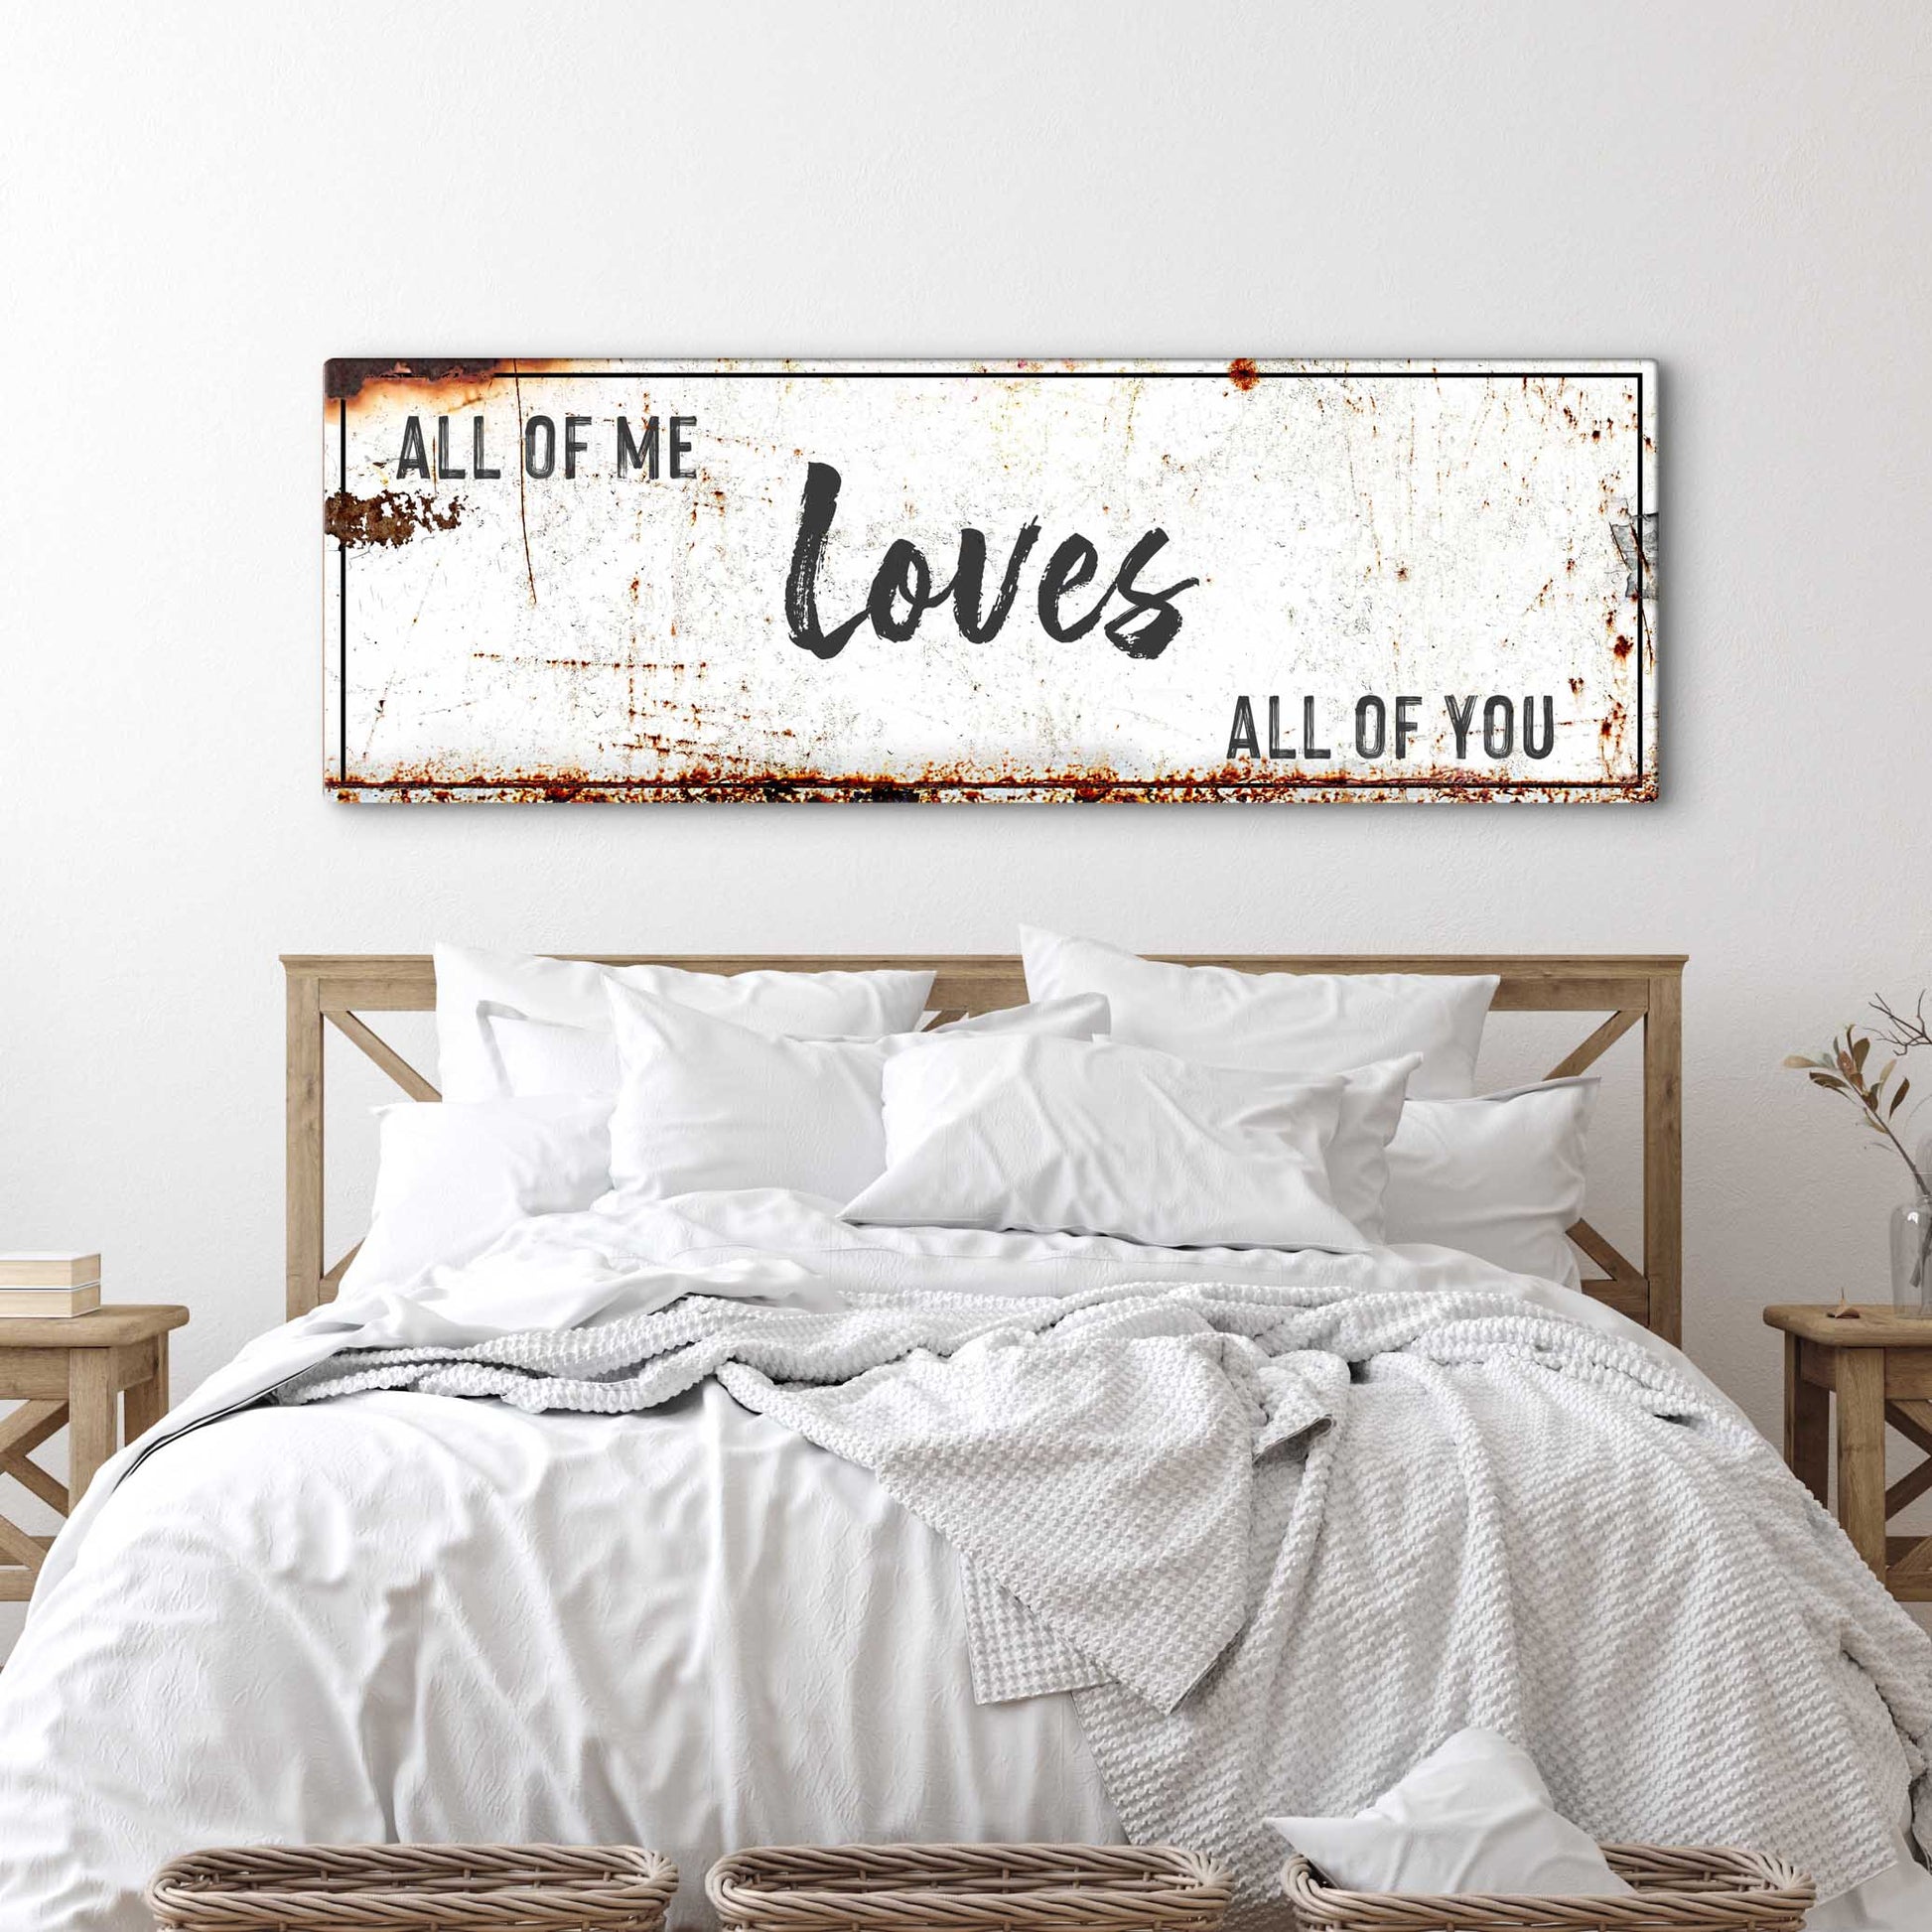 All of me loves all of you Rustic Bedroom Sign - Image by Tailored Canvases